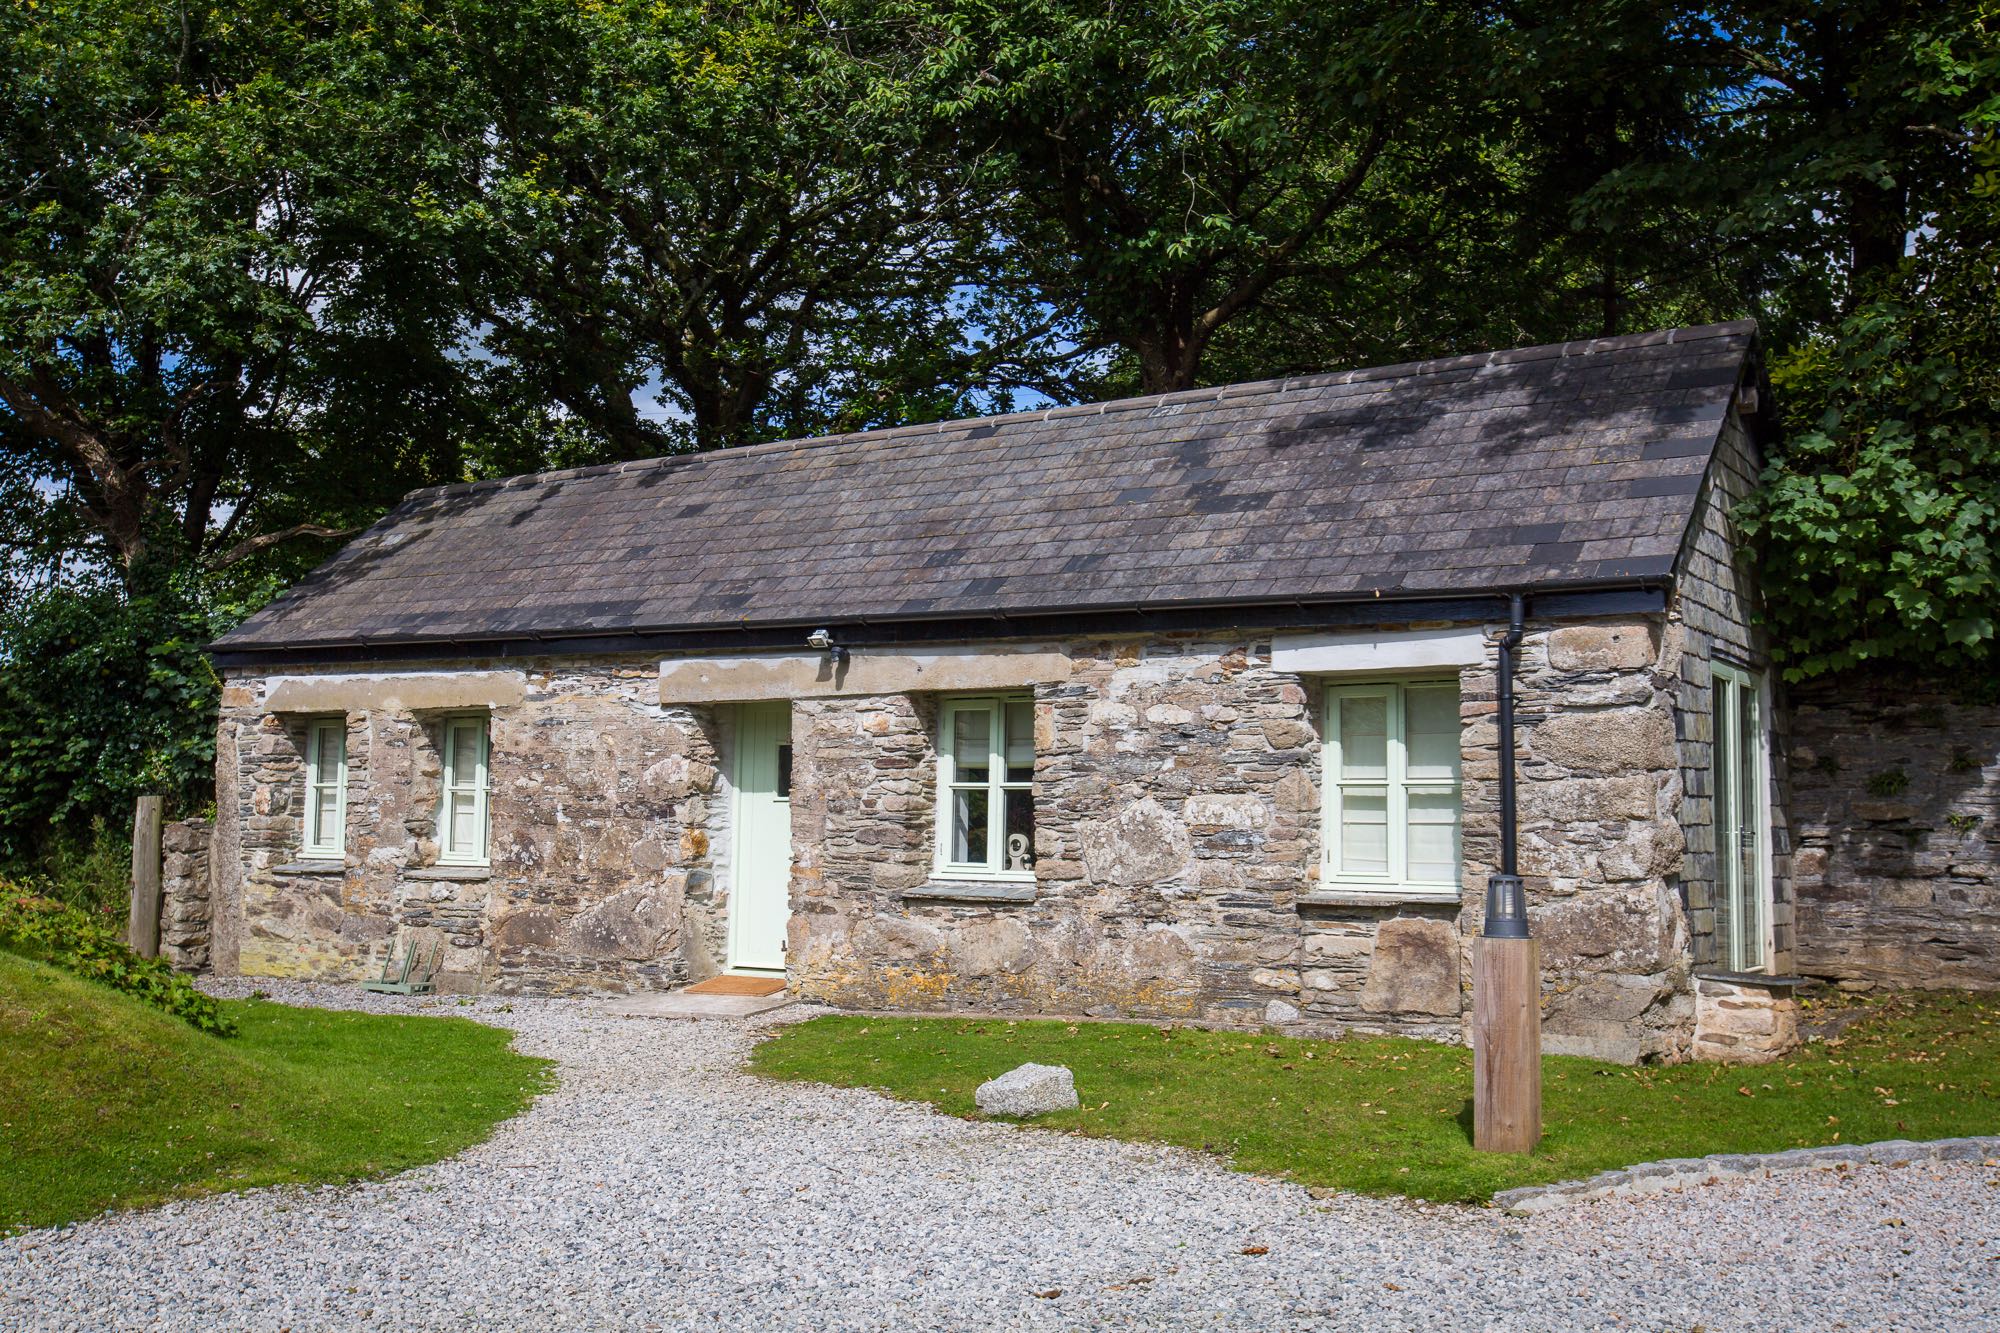 This is a photo of cottage number one. Cottage number one sleeps two people. The proerty is single storey. The photo shows the full width of the cottage. In the background you can see trees which are in leaf. In the foreground you can see two patches of grass one on the left and one on the right and in the front there is gravel. The cottage is made of granite stone and is brown and grey in colour. The roof is constructed of grey slate and is pitched with the roof line running from left to right of the photograph along the length of the cottage. In the middle of the front of the cottage there is a wooden door that is painted pale green on either side of the story there are two windows on each side of this door. They are georgian style sash windows and also painted green. On the right hand side of the cottage the gable end has hanging slate on it. There is a French window in this end of the cottage and it is also painted green. In the foreground of the picture there is a light bollard for outside lighting.